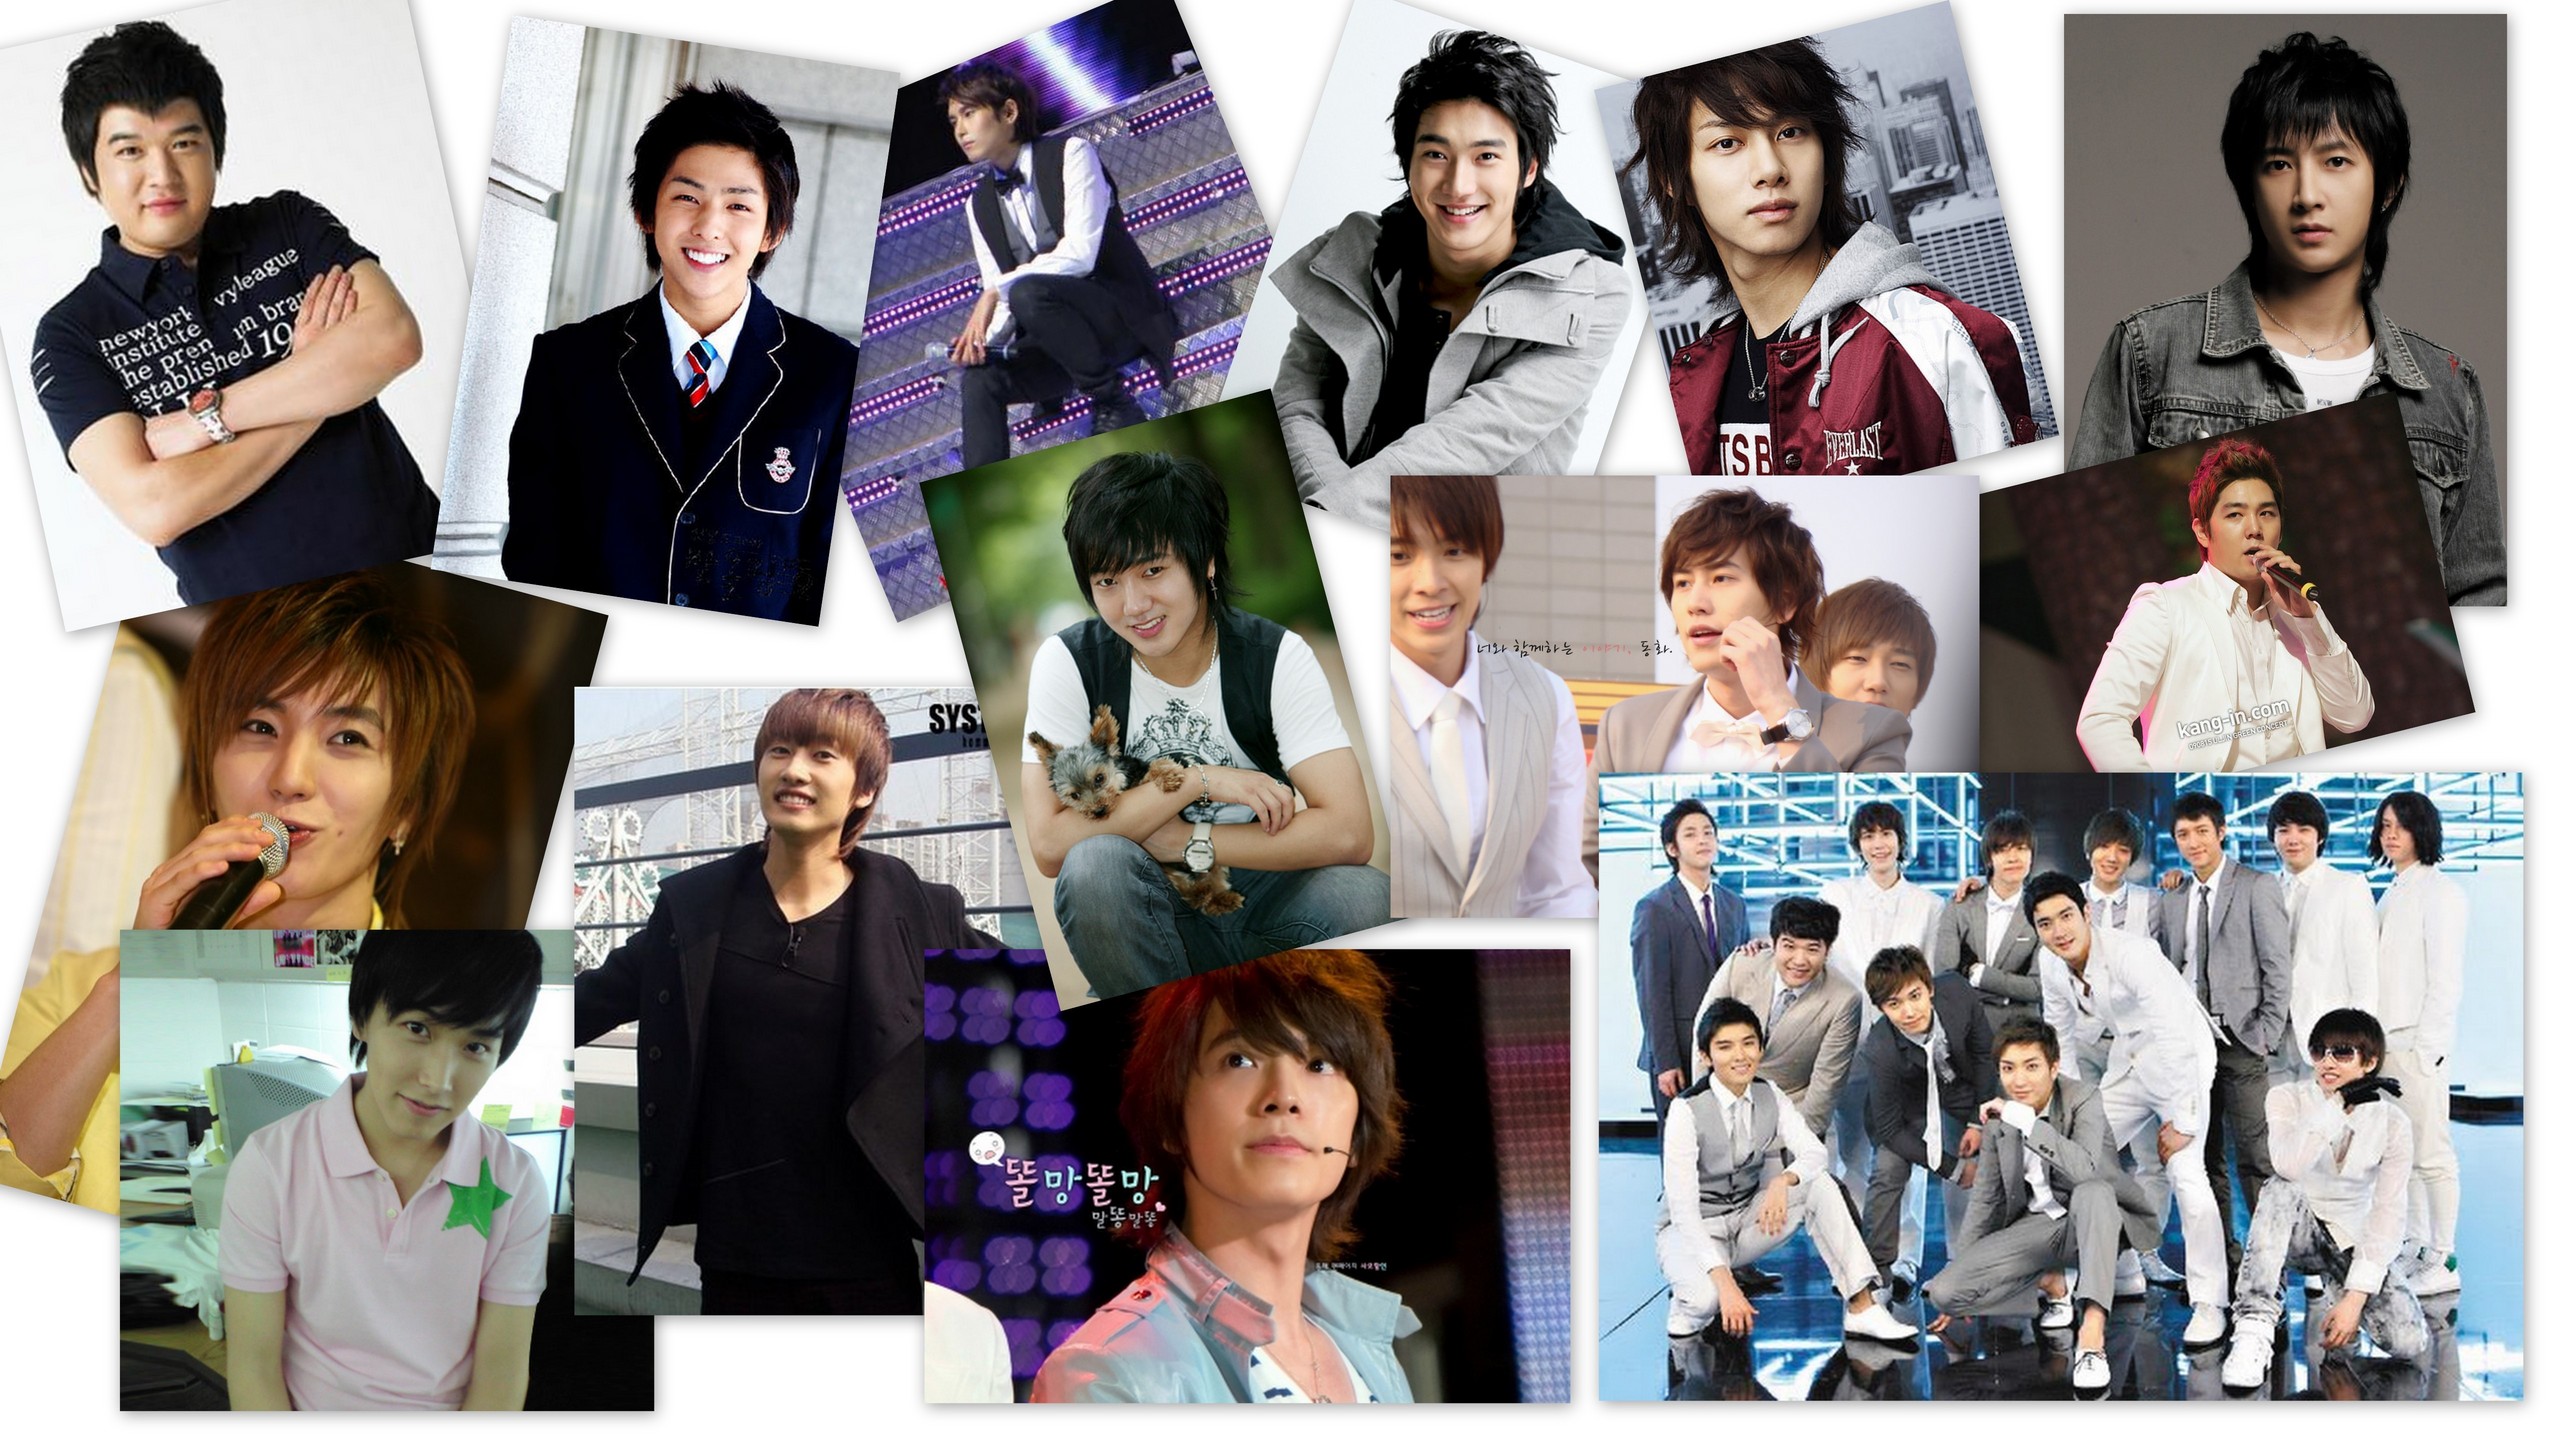 Download this Super Junior Forever picture